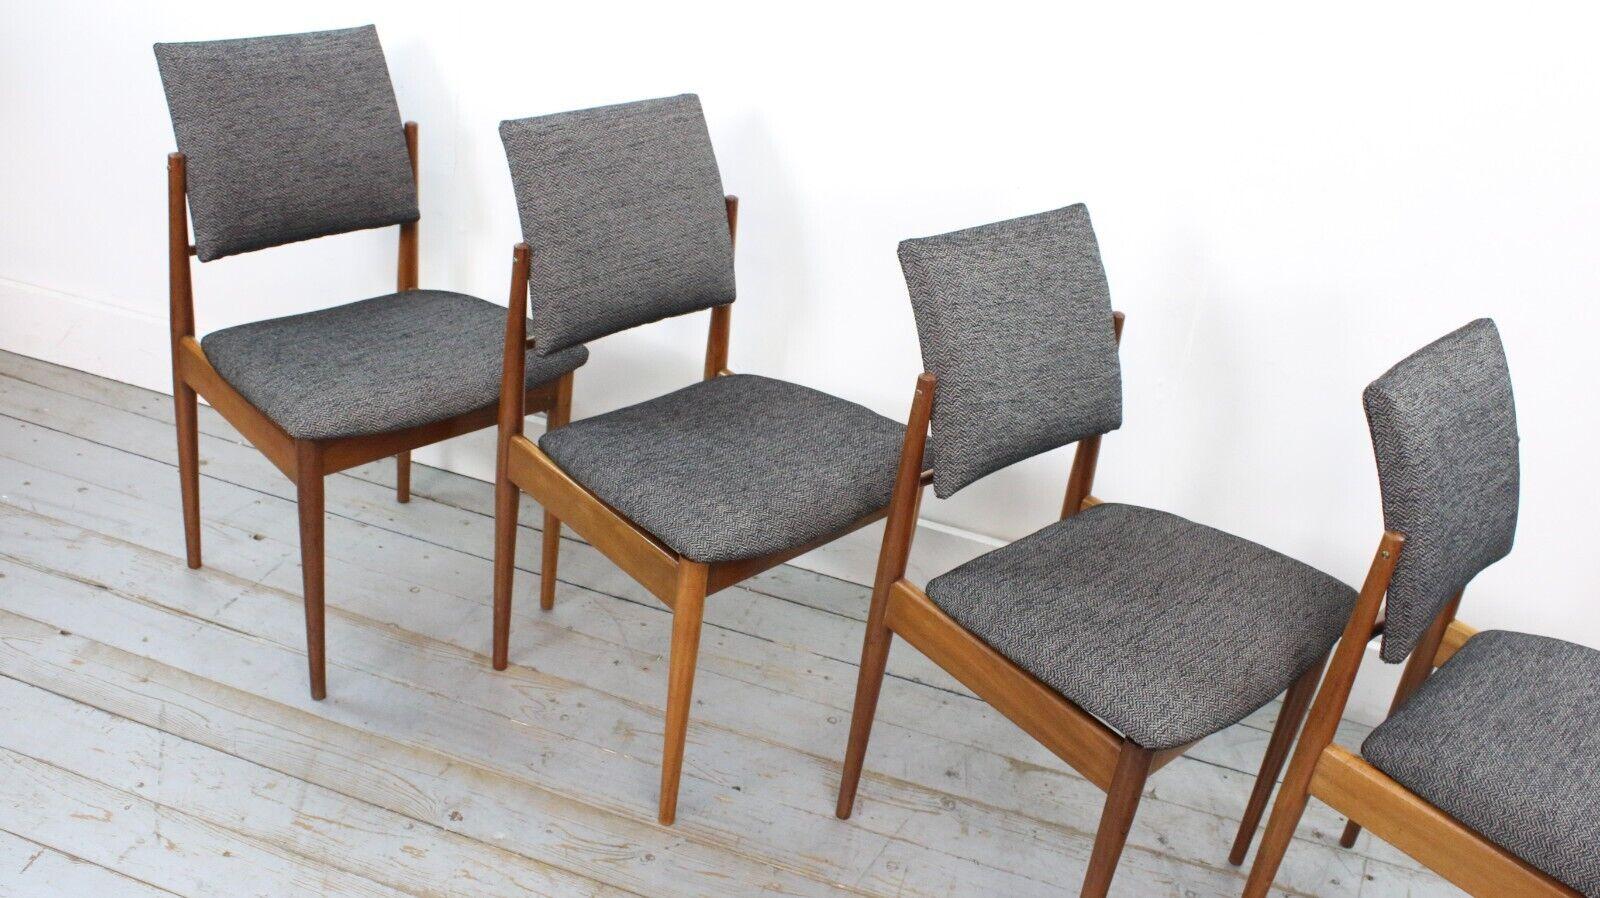 Rarely available and newly upholstered dining chair set designed by Robert Heritage for Archie Shine from 1960.

Four mahogany framed Berkshire range soft back chairs, finished in a dark herringbone grey/light black fabric.

Excellent examples